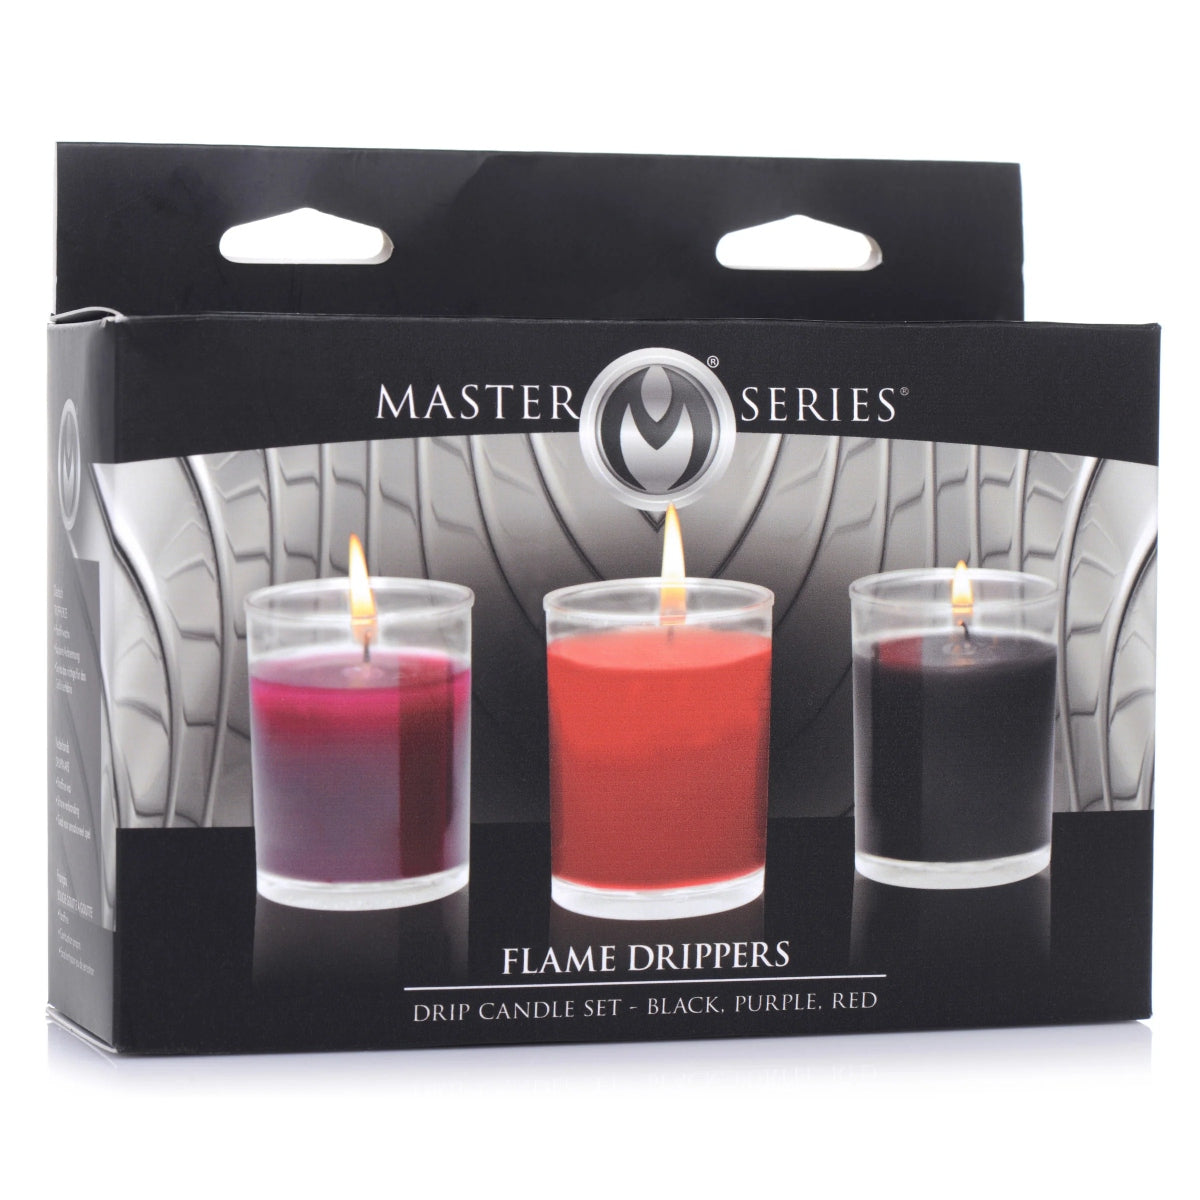 Master Series Flame Drippers Wax Play Candle Set